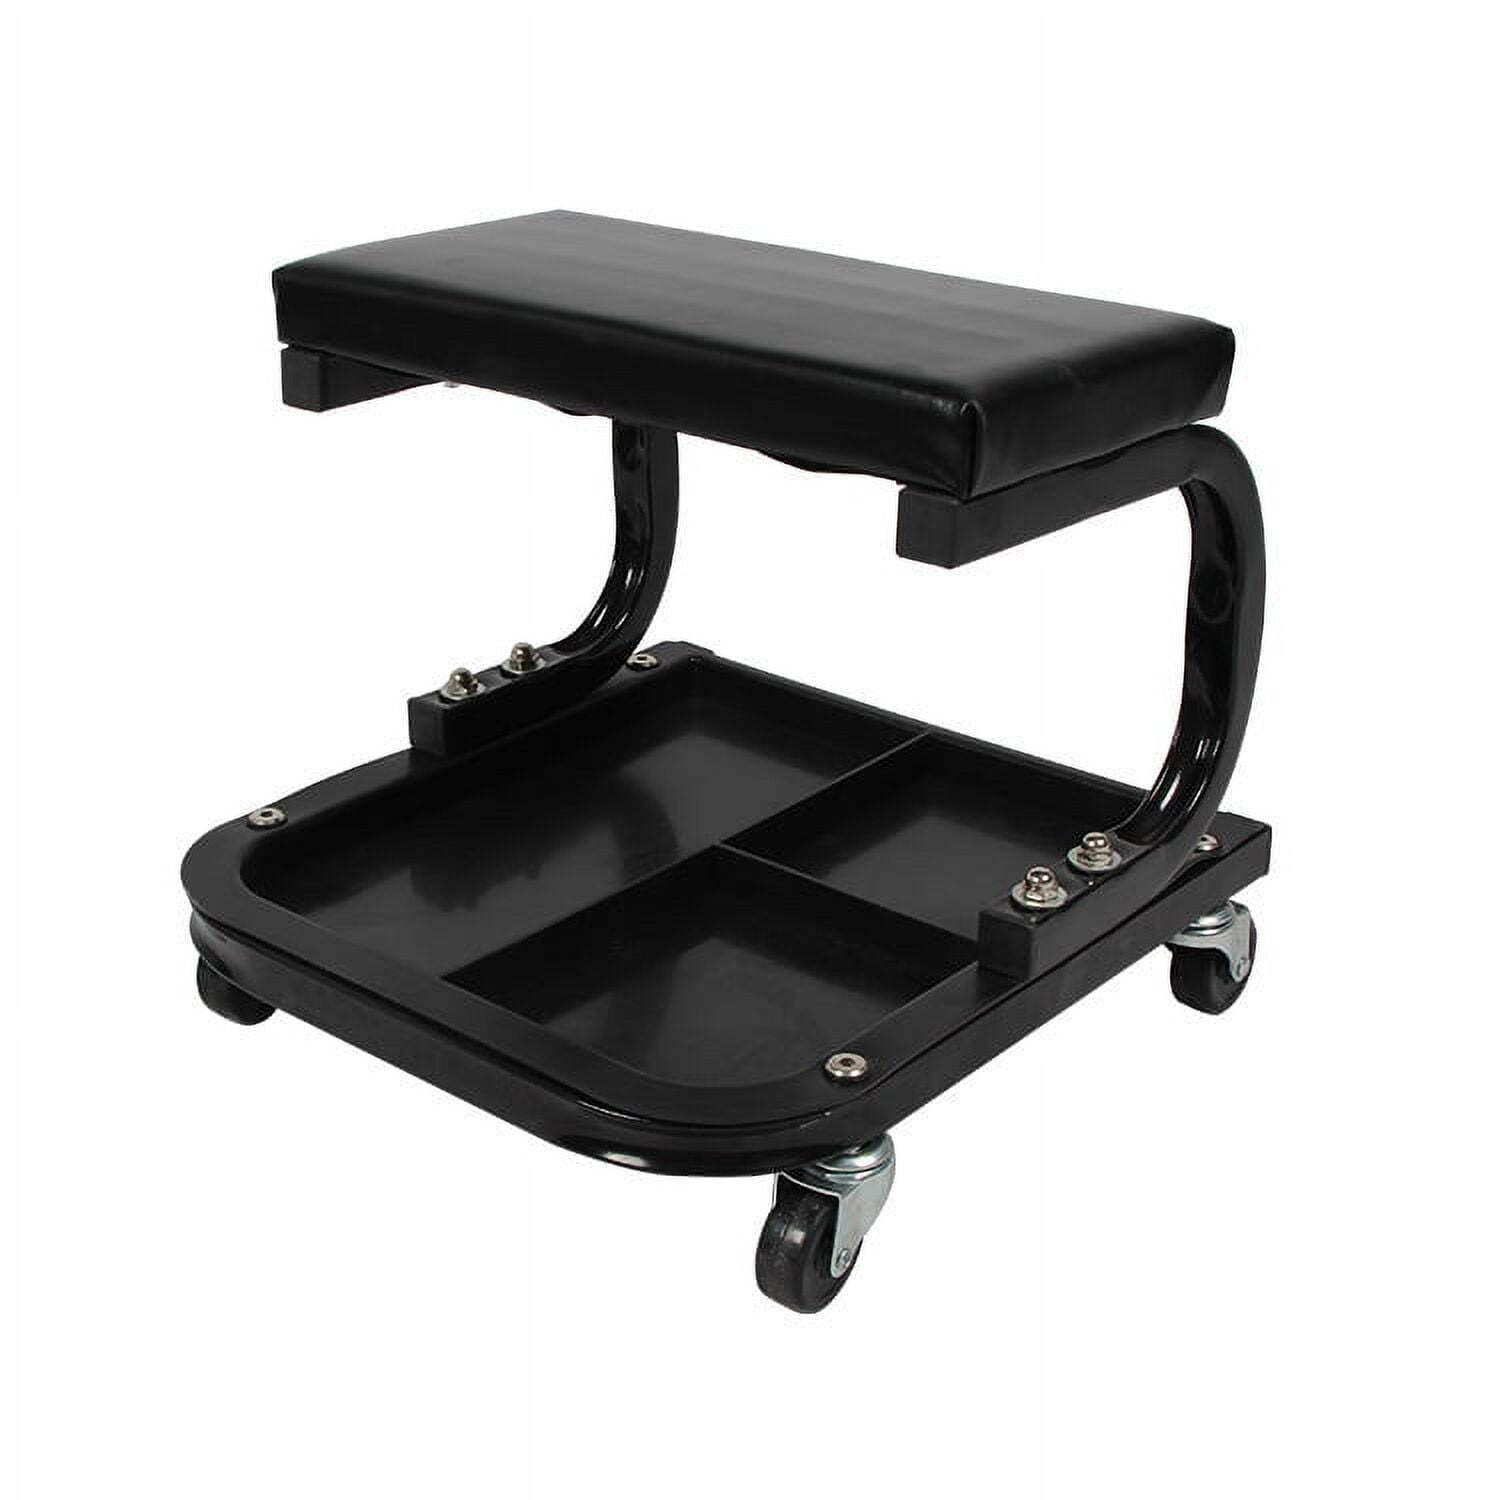 Garage Shop Creeper Seat with Tool Tray Rolling Padded Auto Mechanic Stool 250